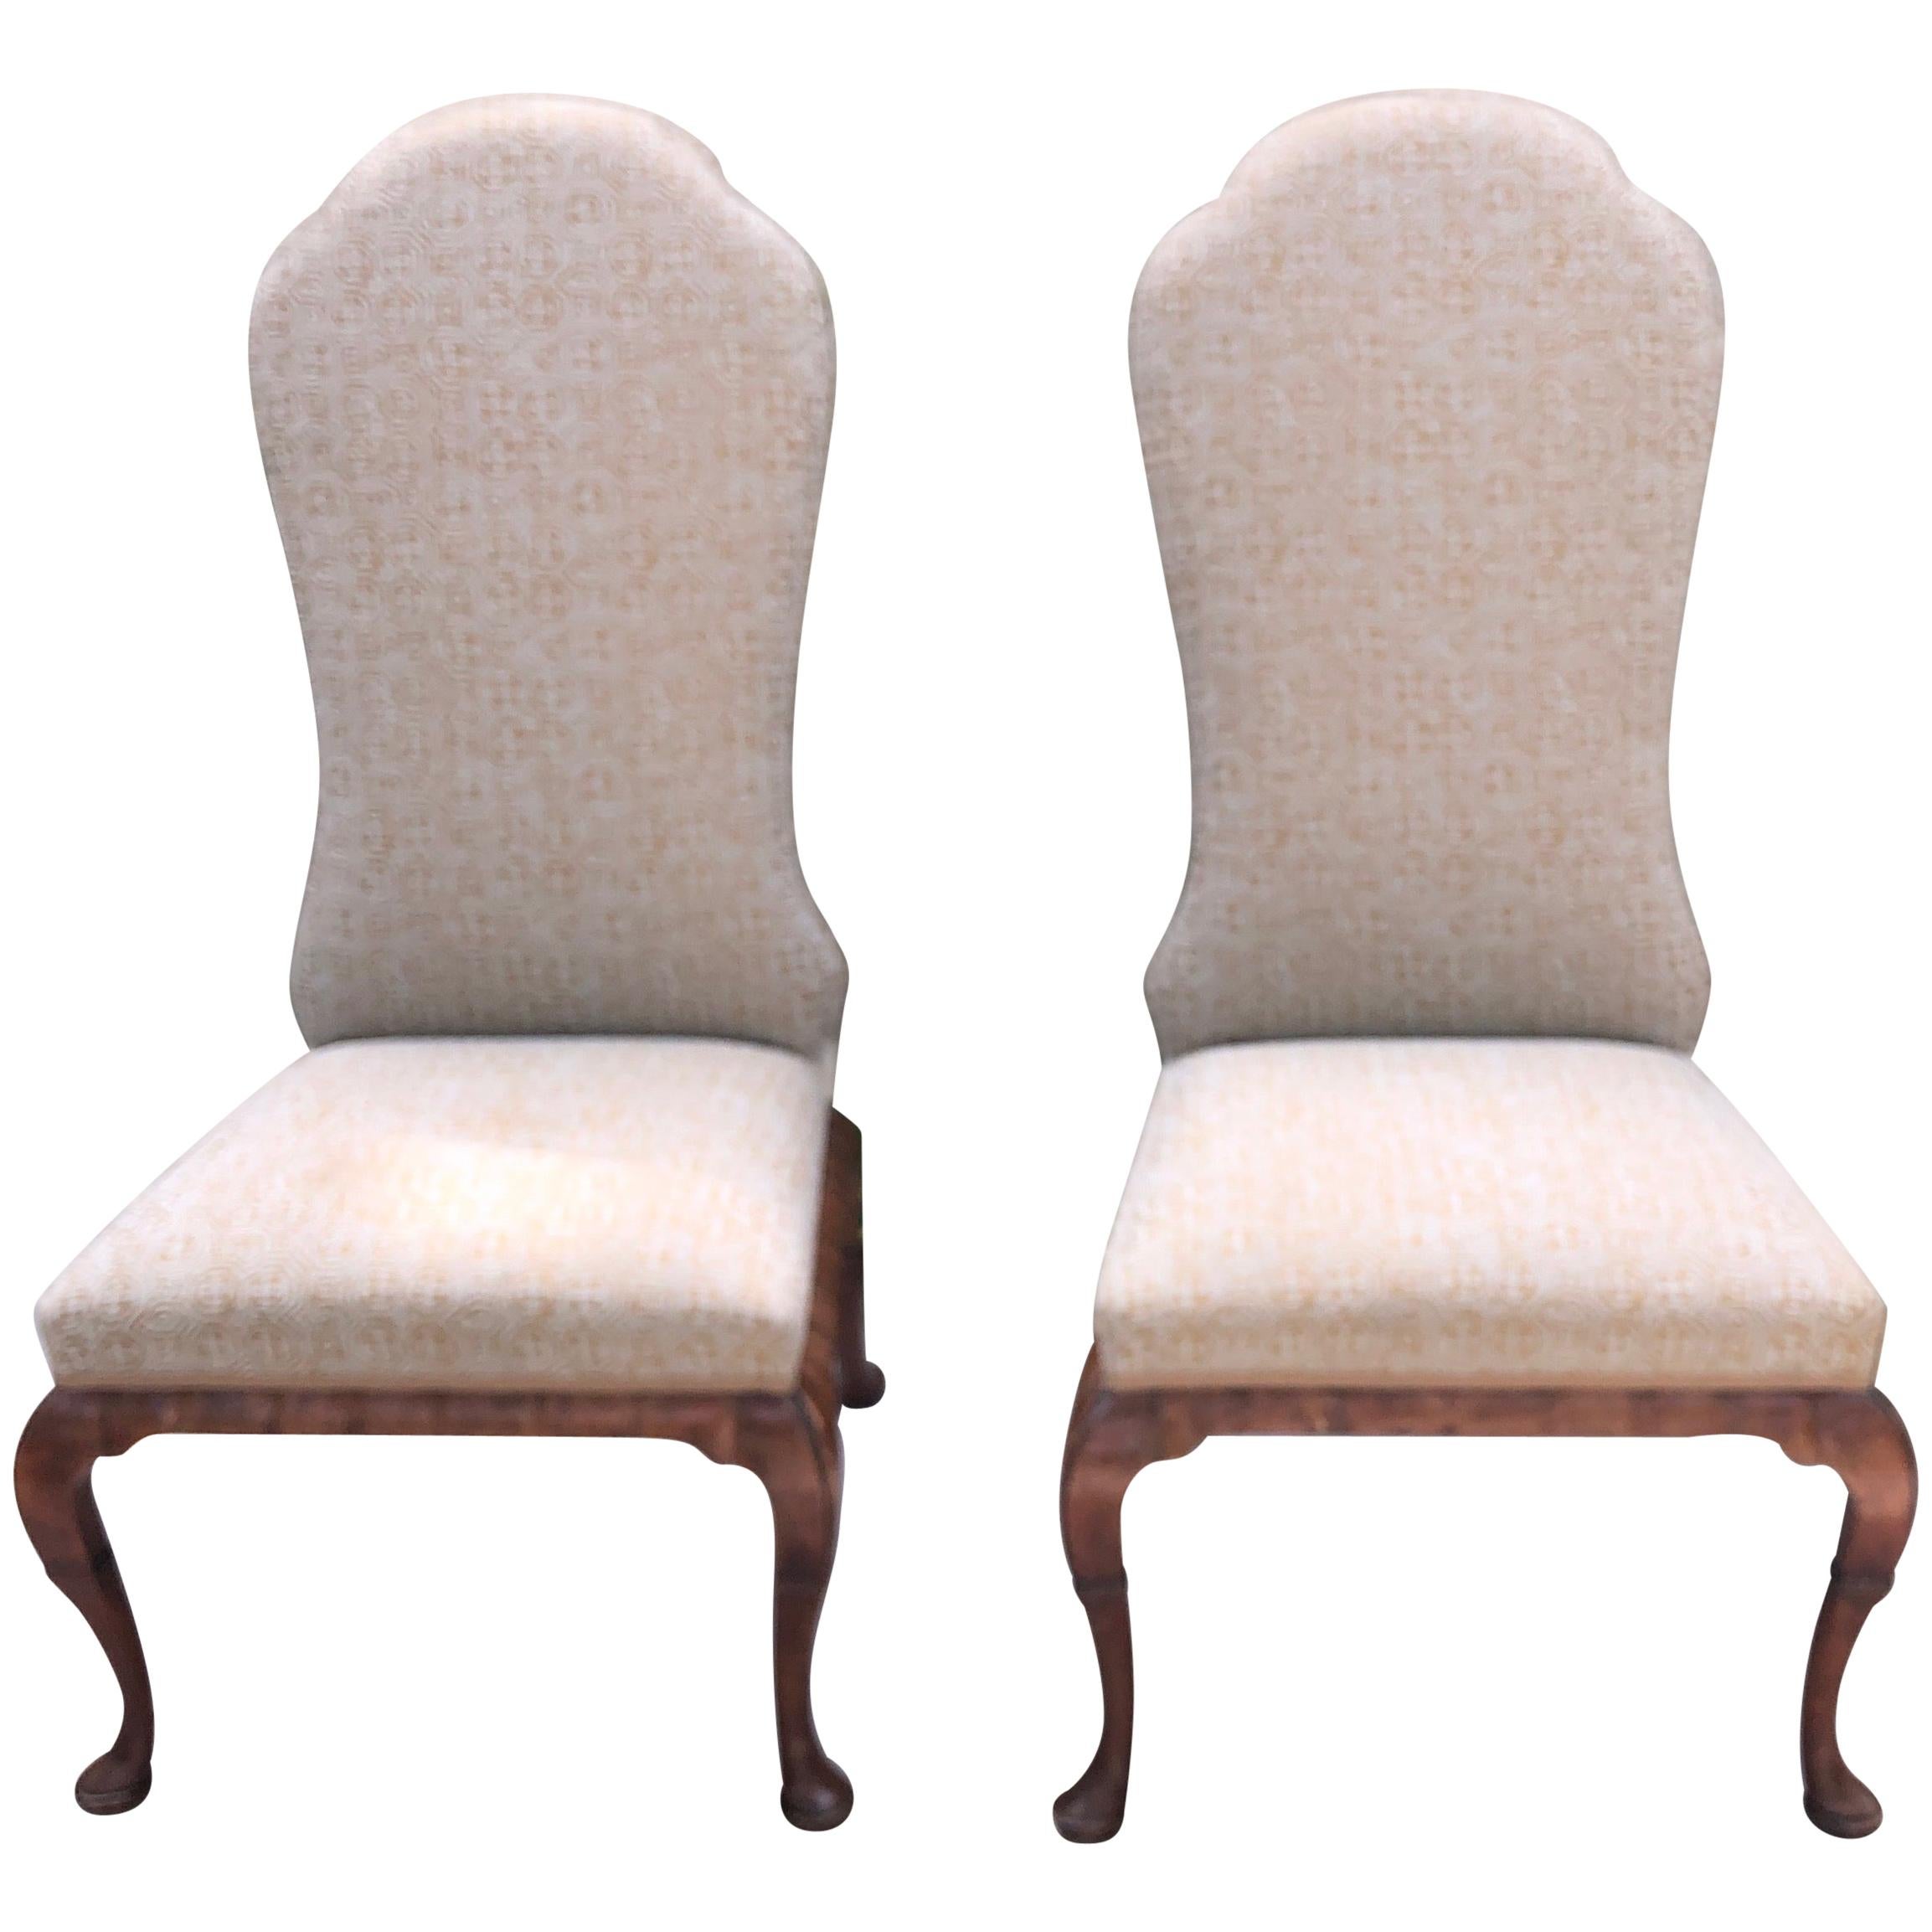 Pair of Queen Anne Dennis and Leen Chairs